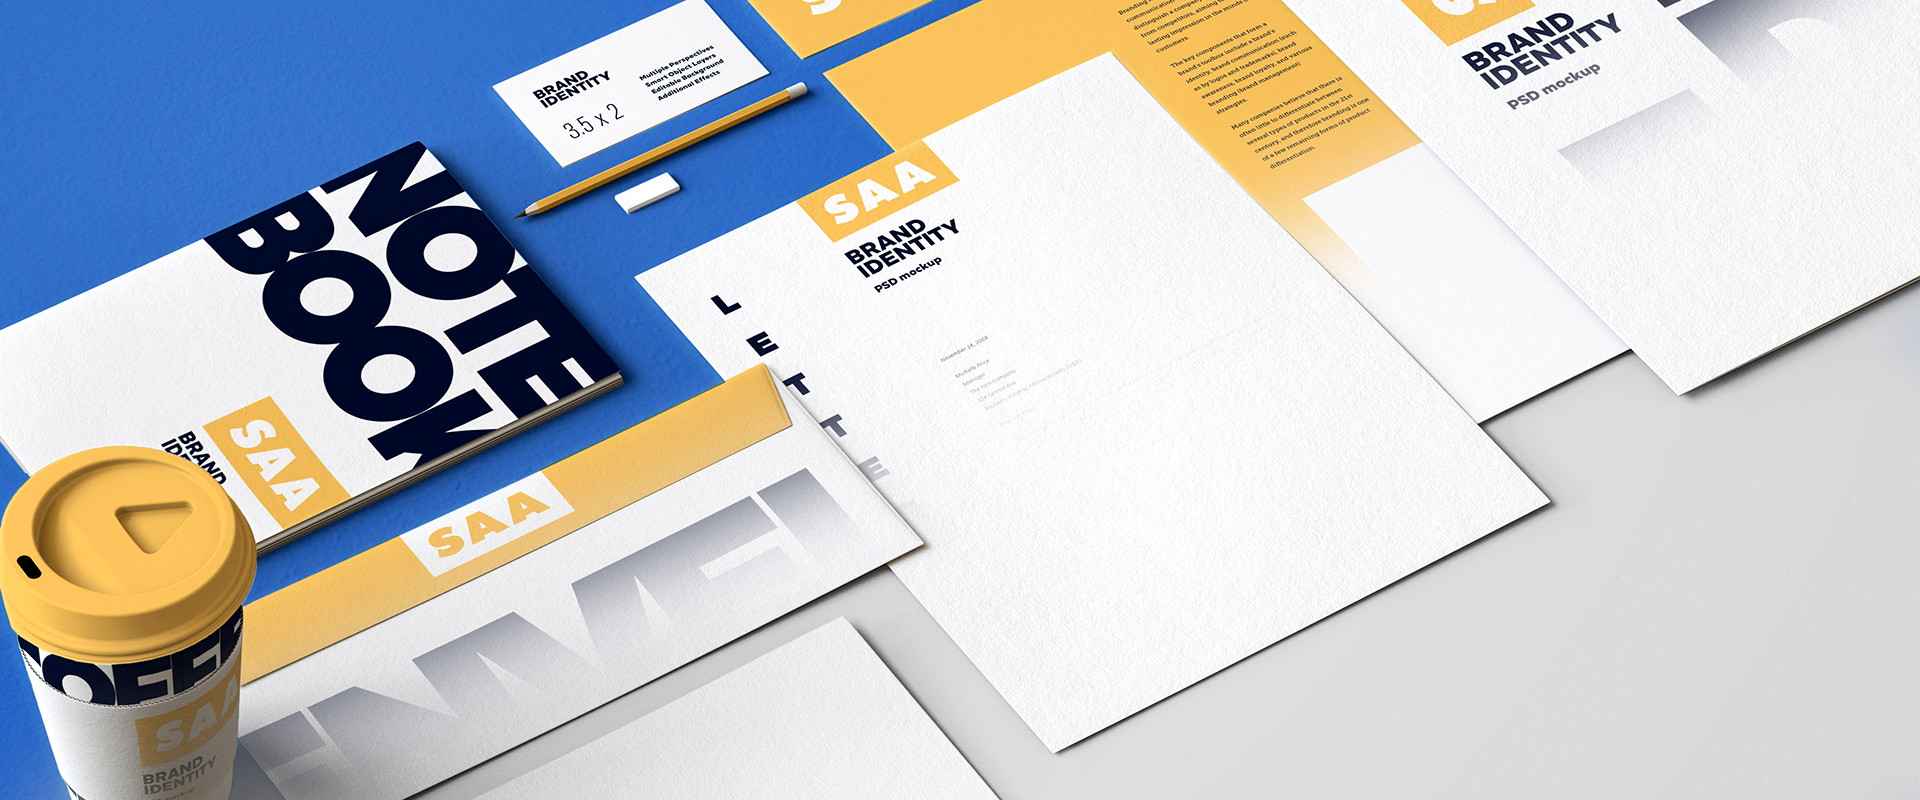 7 FREE Identity Design Mockups Pack on Behance3a3a4481442495.5cffe55b4d8e9.png